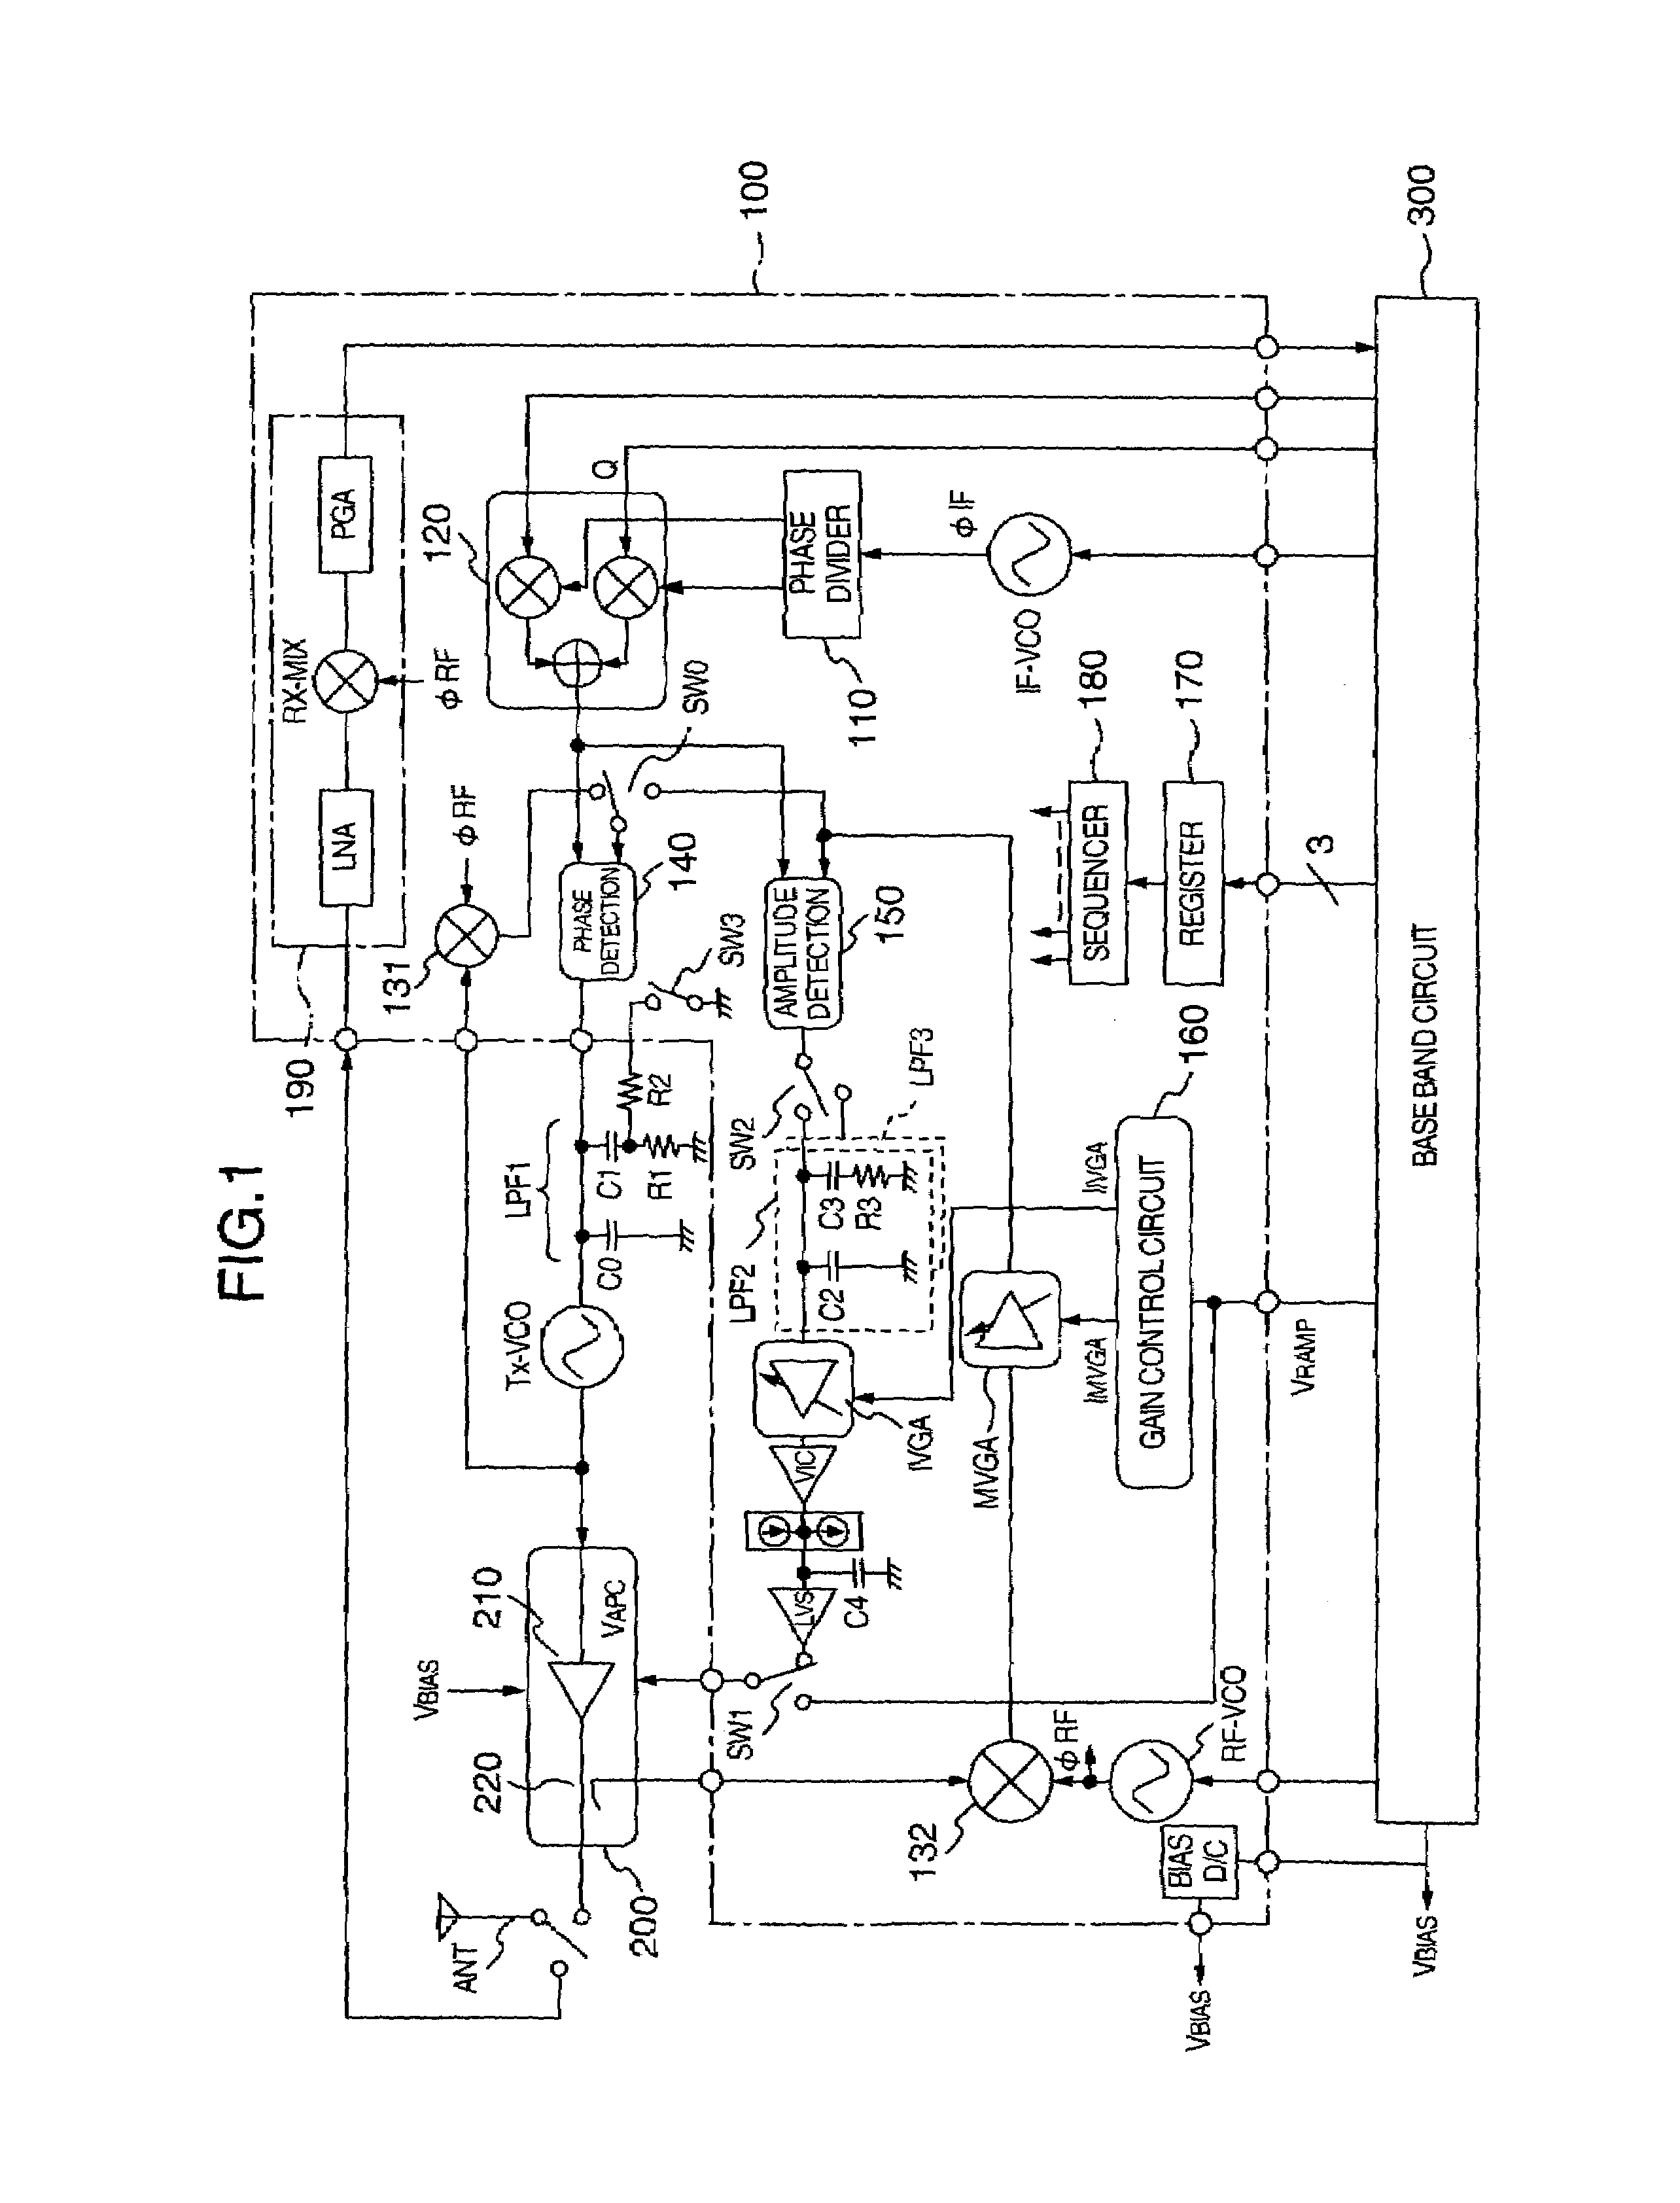 Transmitter having a phase control loop whose frequency bandwidth is varied in accordance with modulation modes